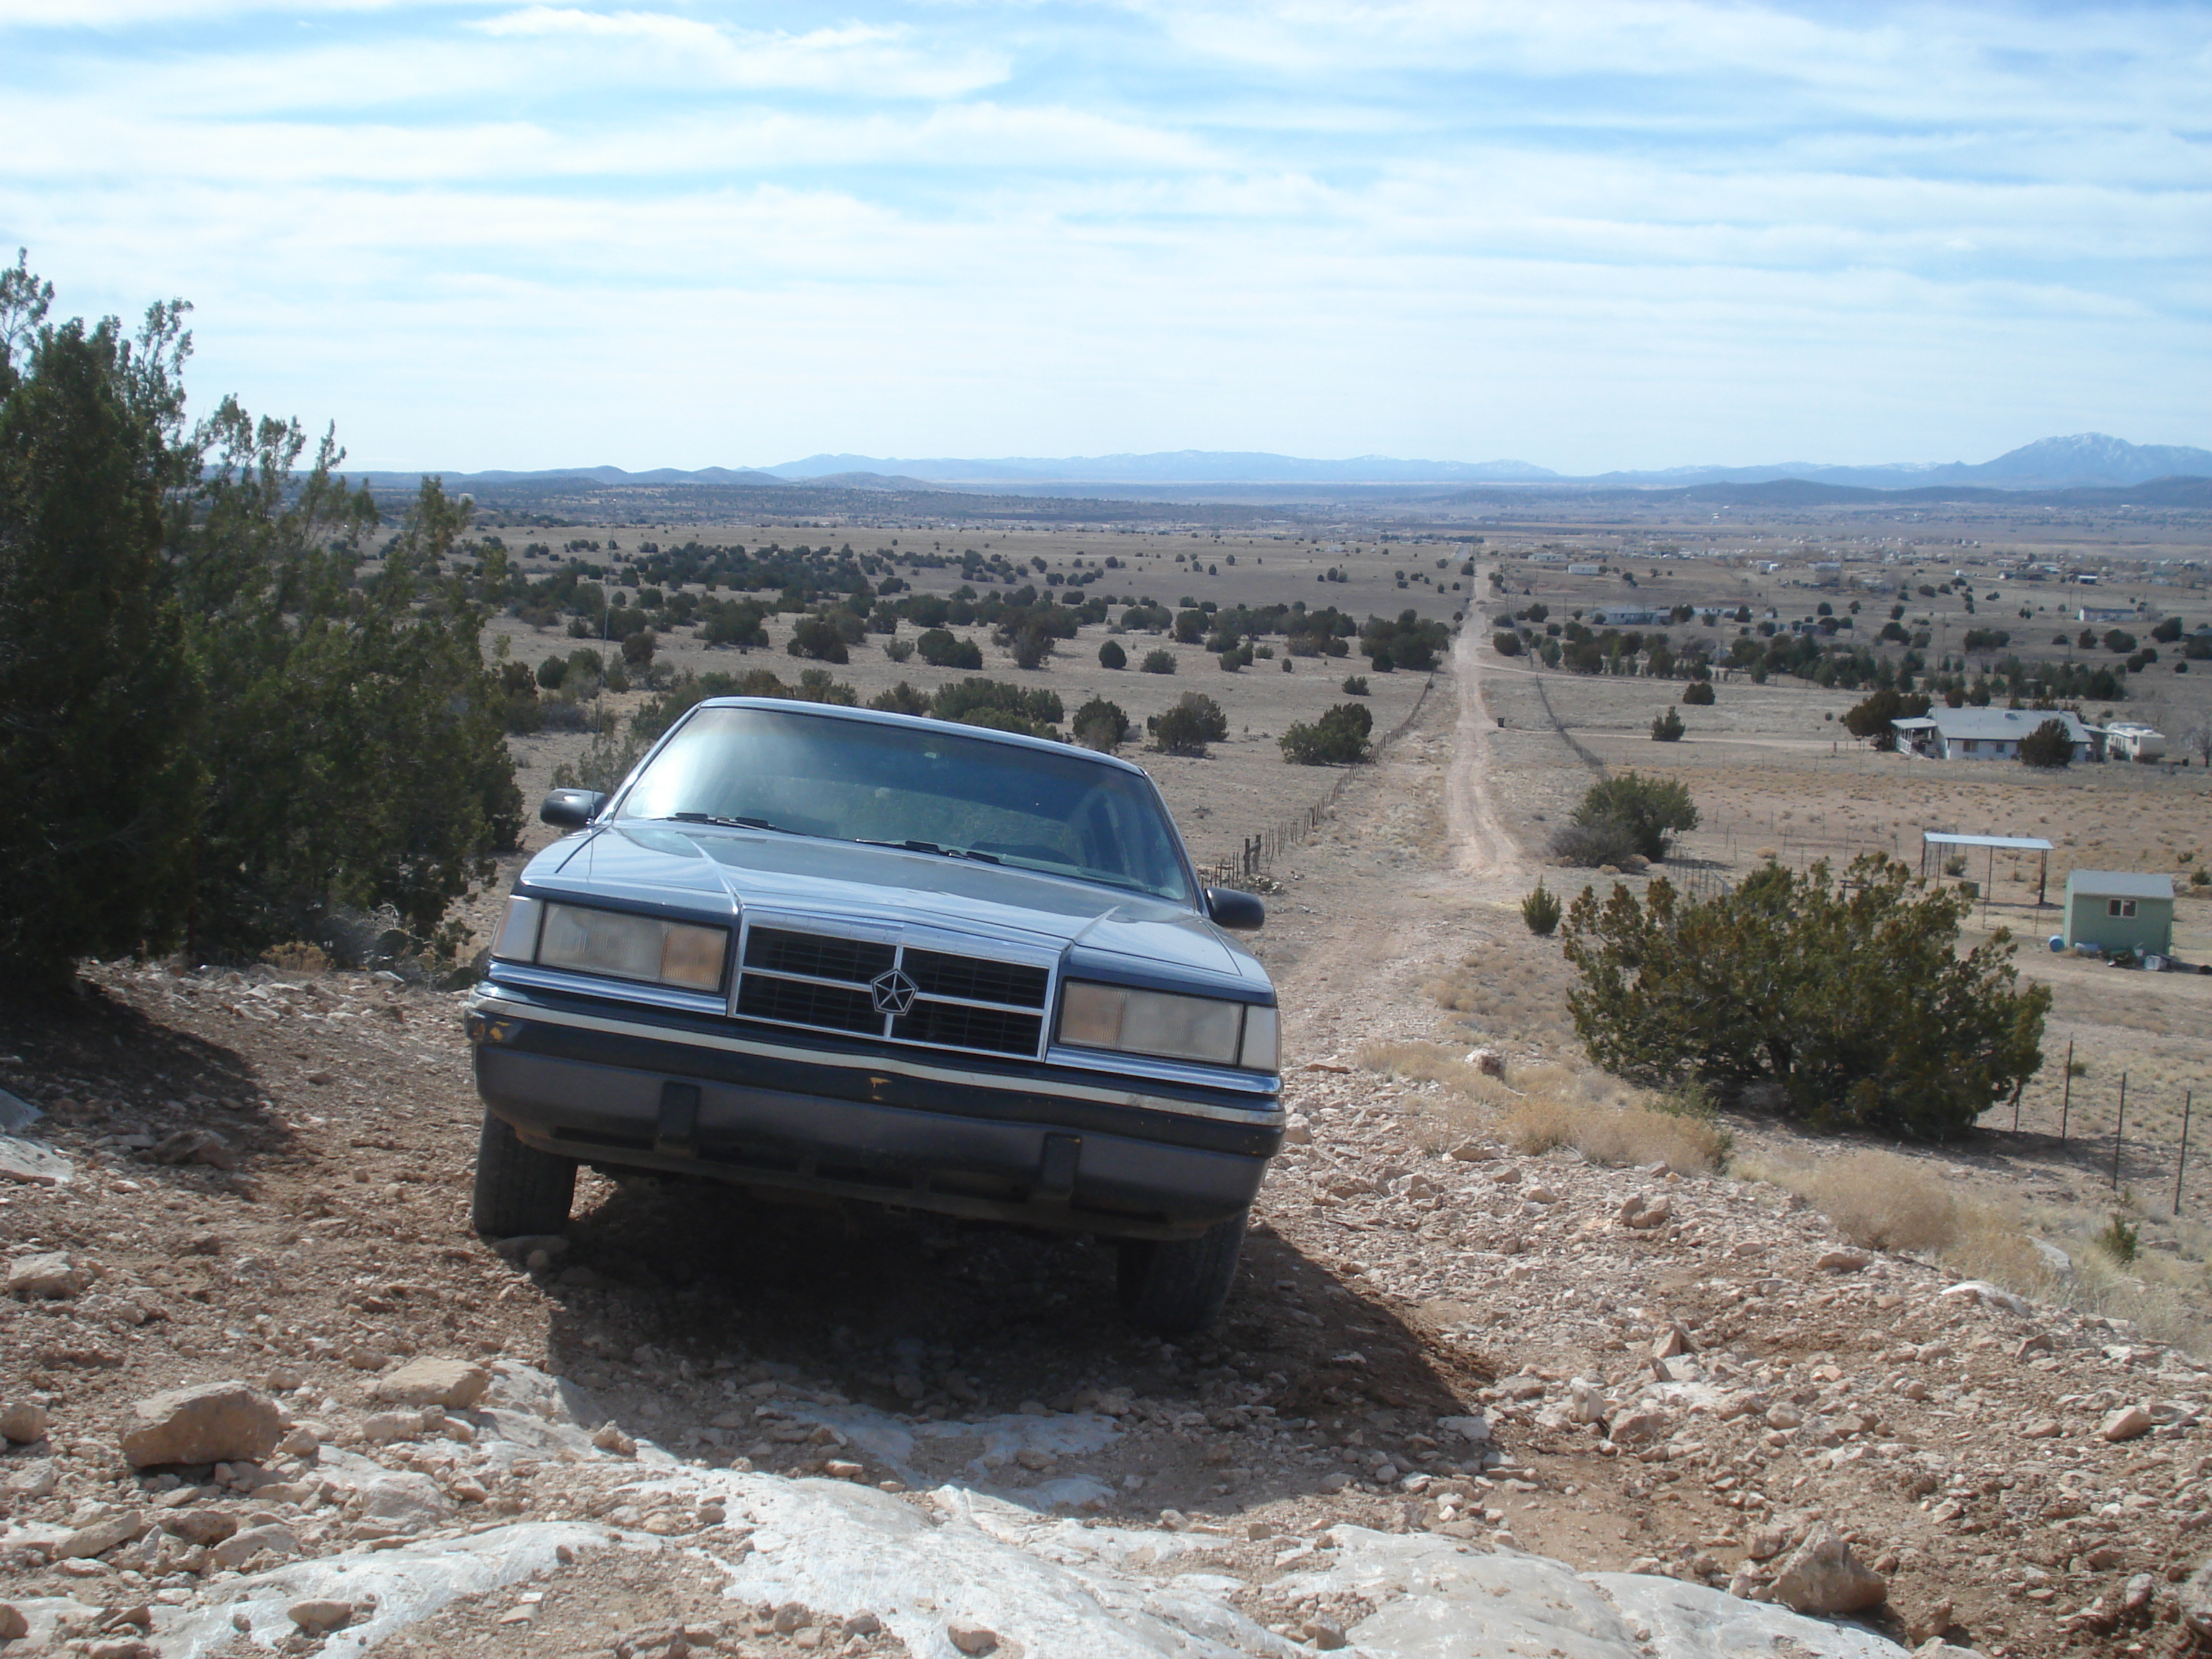 Old Dodge Dynasty in the desert | Flickr - Photo Sharing!